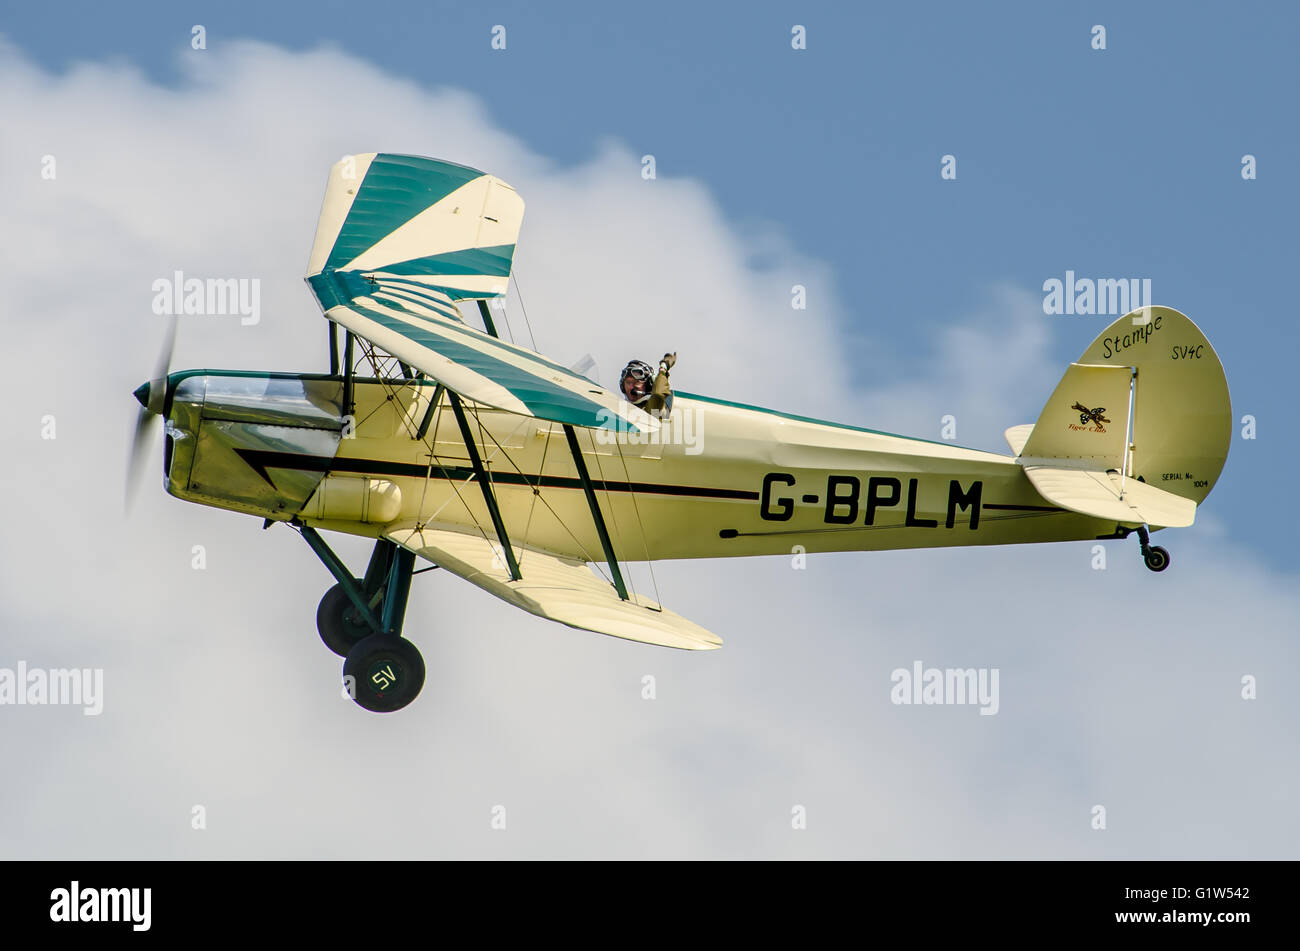 The Stampe SV.4 was designed as a biplane tourer/training aircraft in the early 1930s by Stampe et Vertongen at Antwerp. Stock Photo